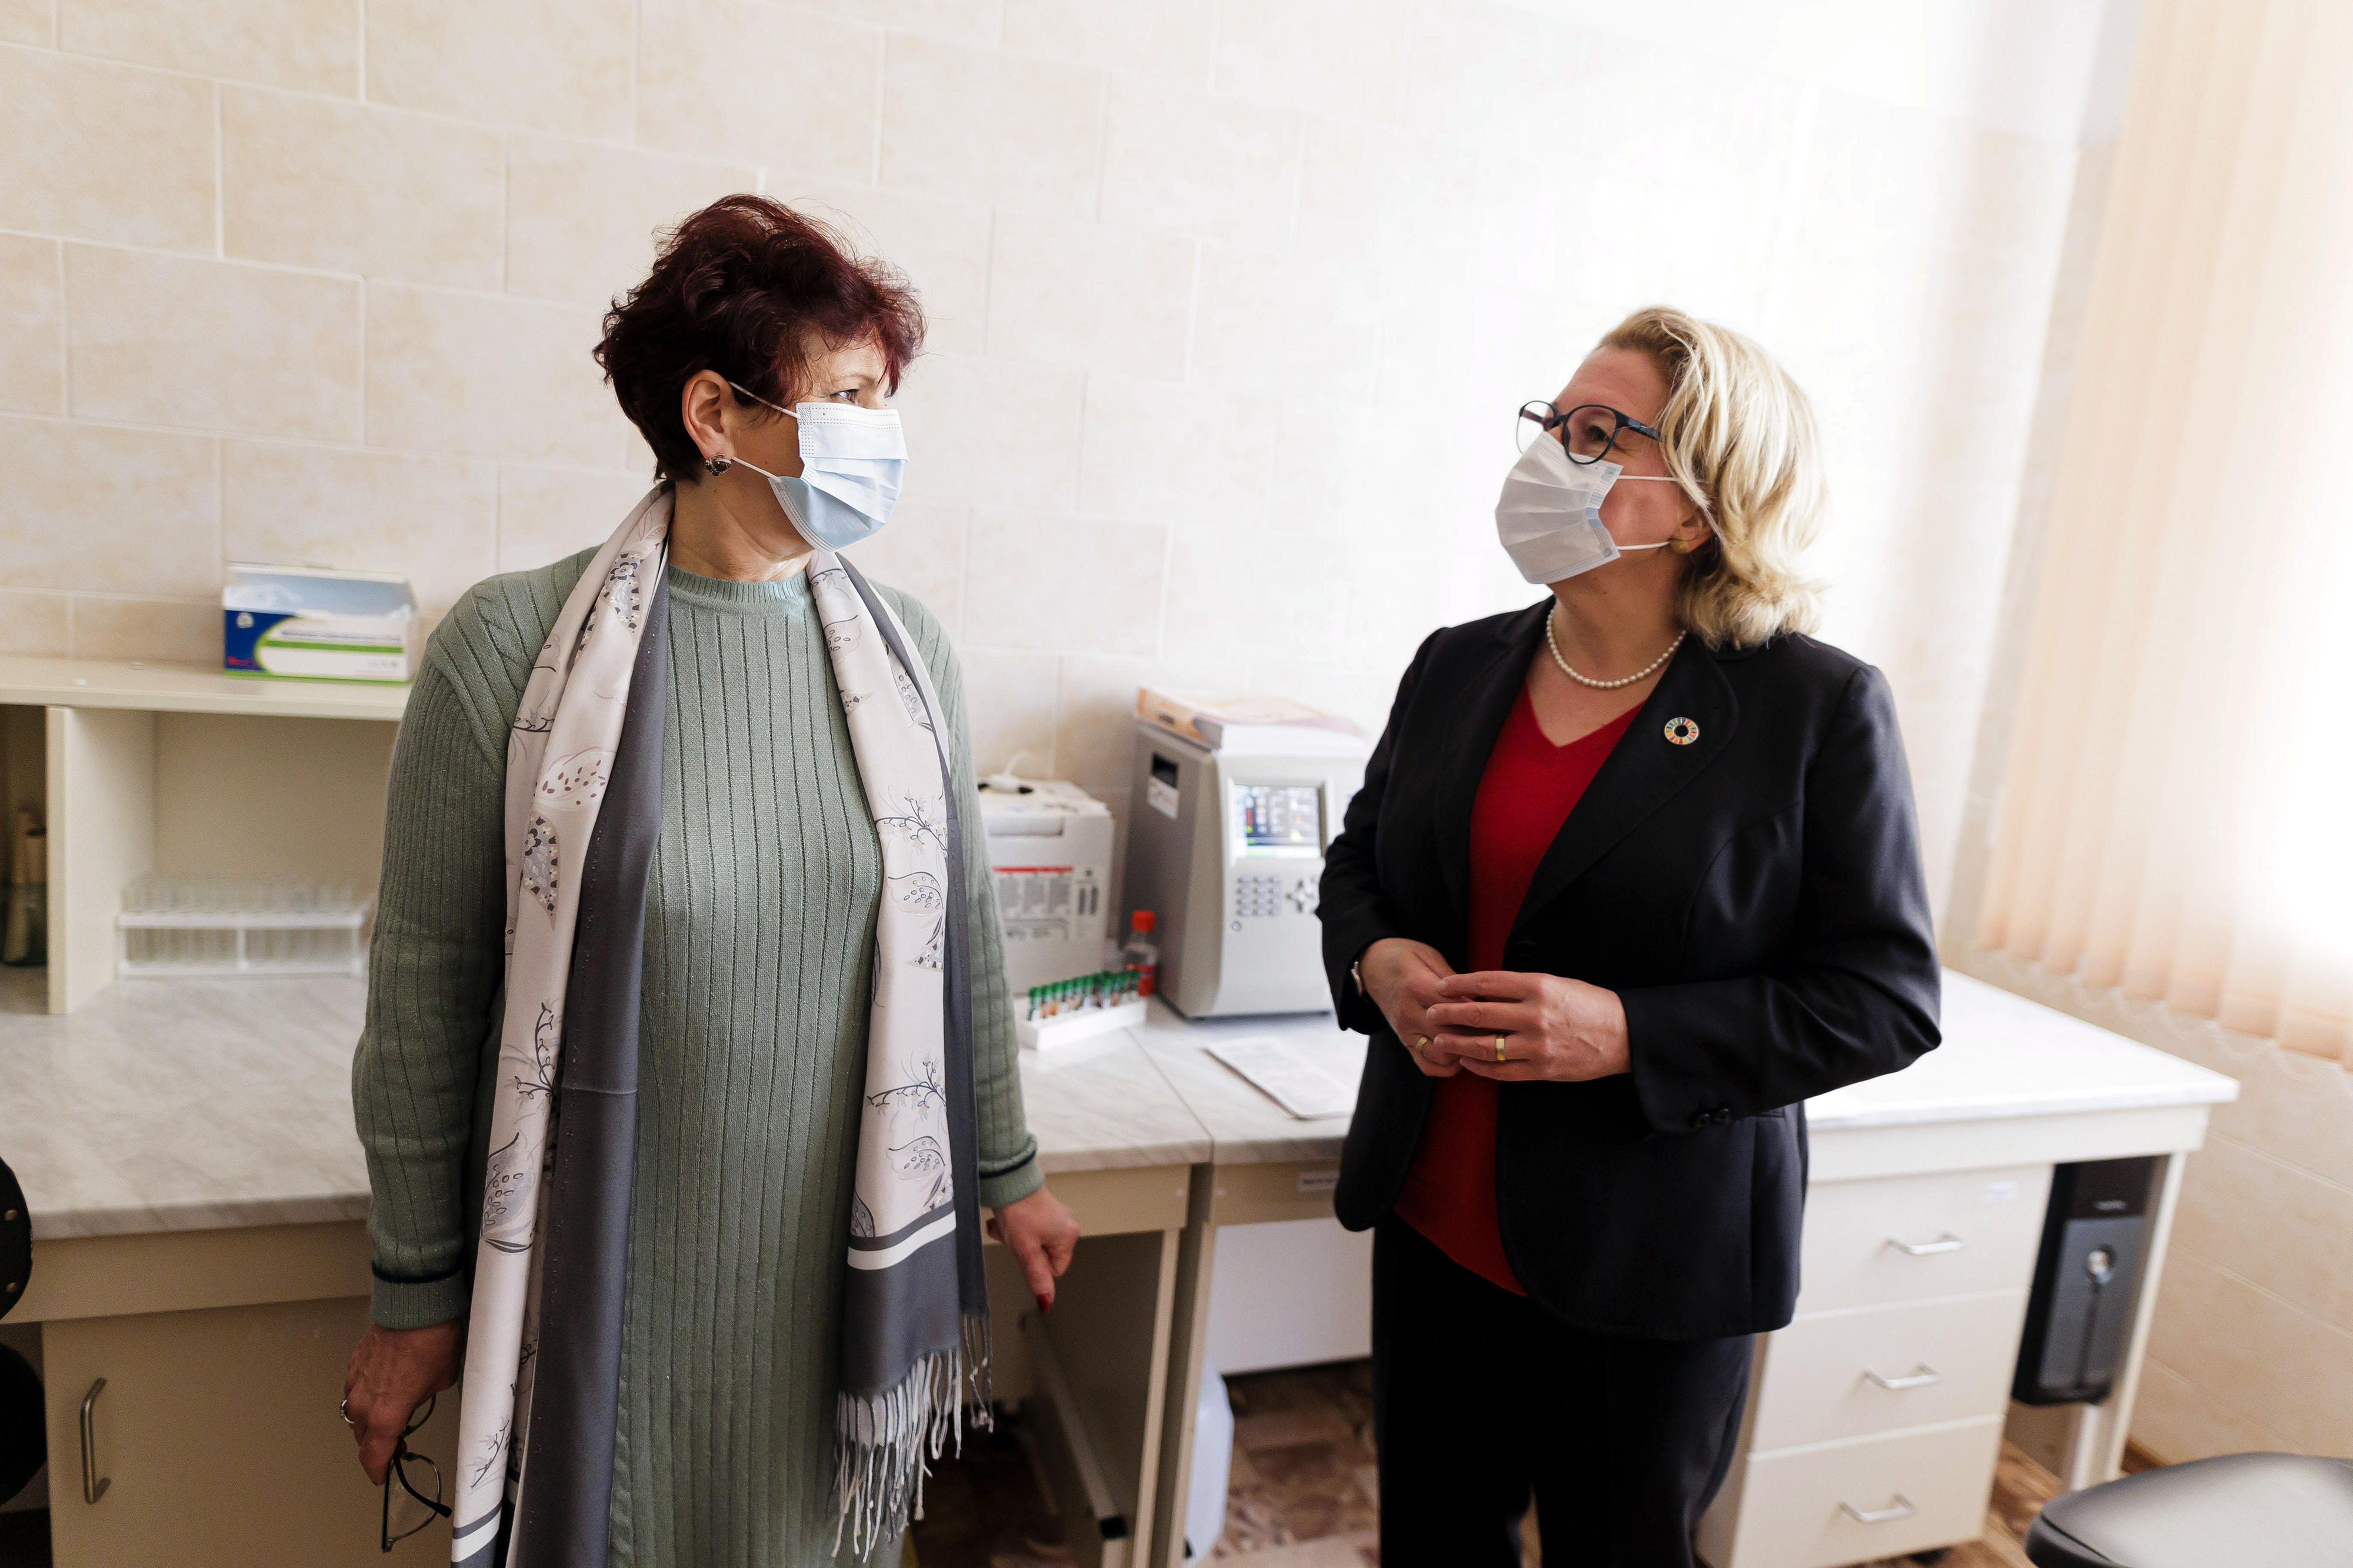 Federal Development Minister Svenja Schulze visiting a medical facility in the Republic of Moldova